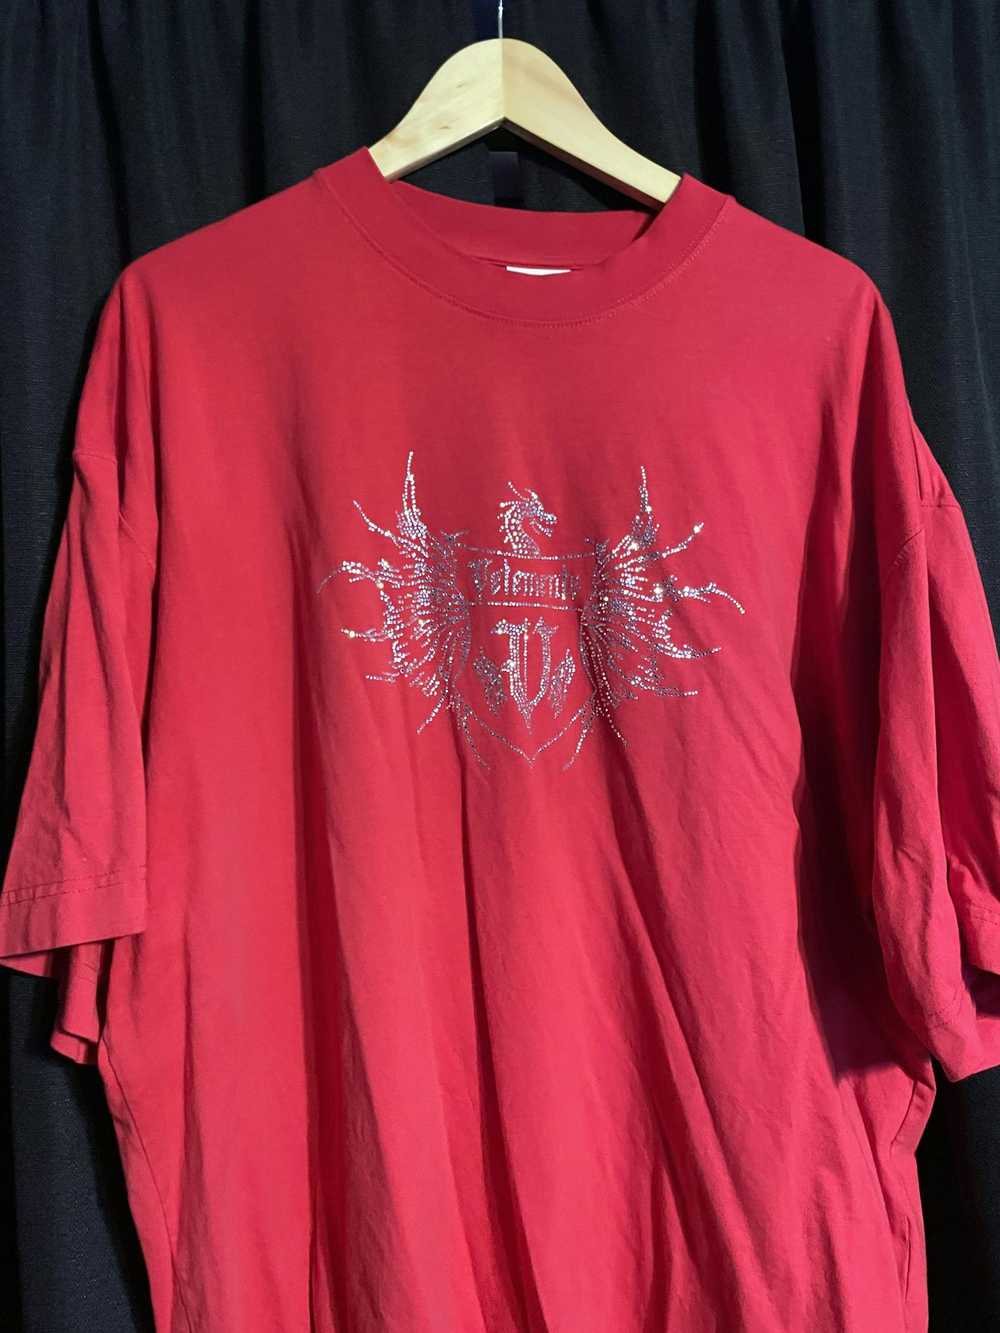 Vetements Red Crystal Logo T-shirt *SOLD* - image 3